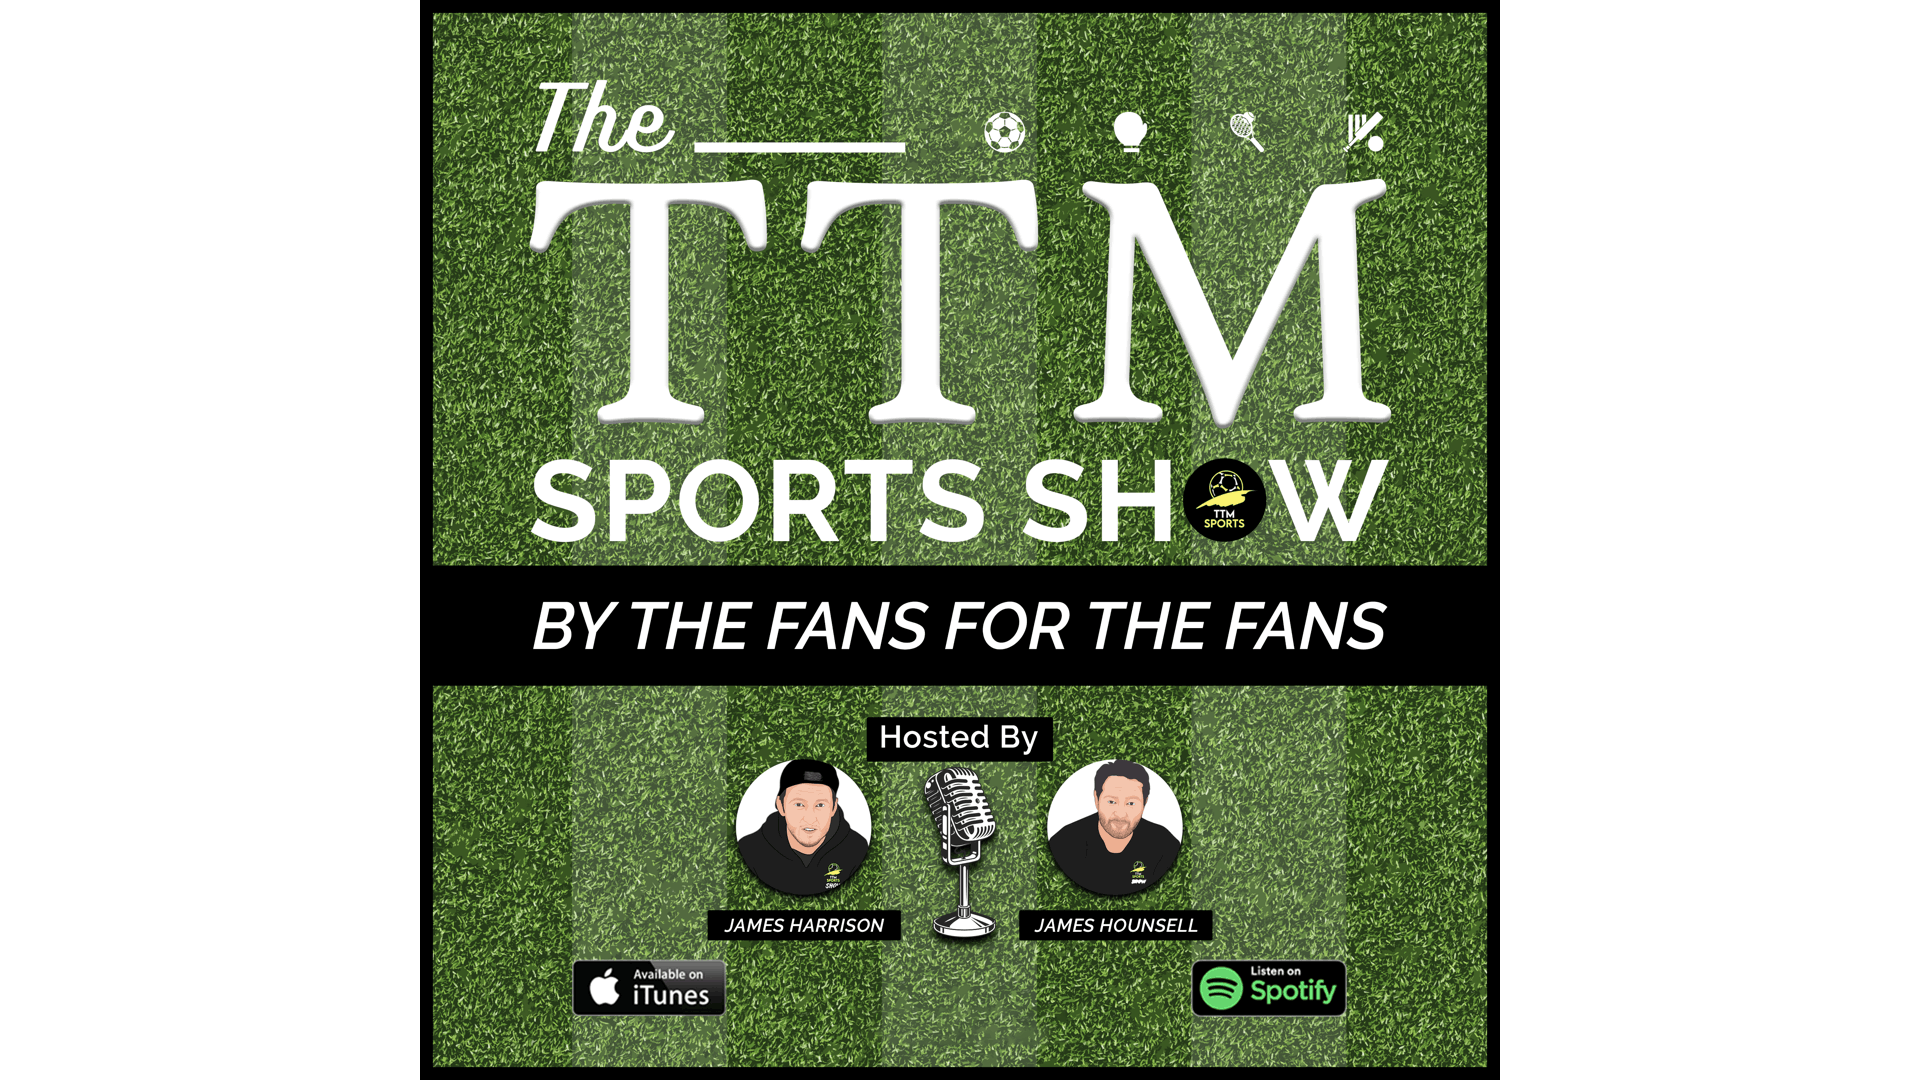 Episode 126 - TTM SPORTS SHOW - LATEST NEWS AND VIEWS